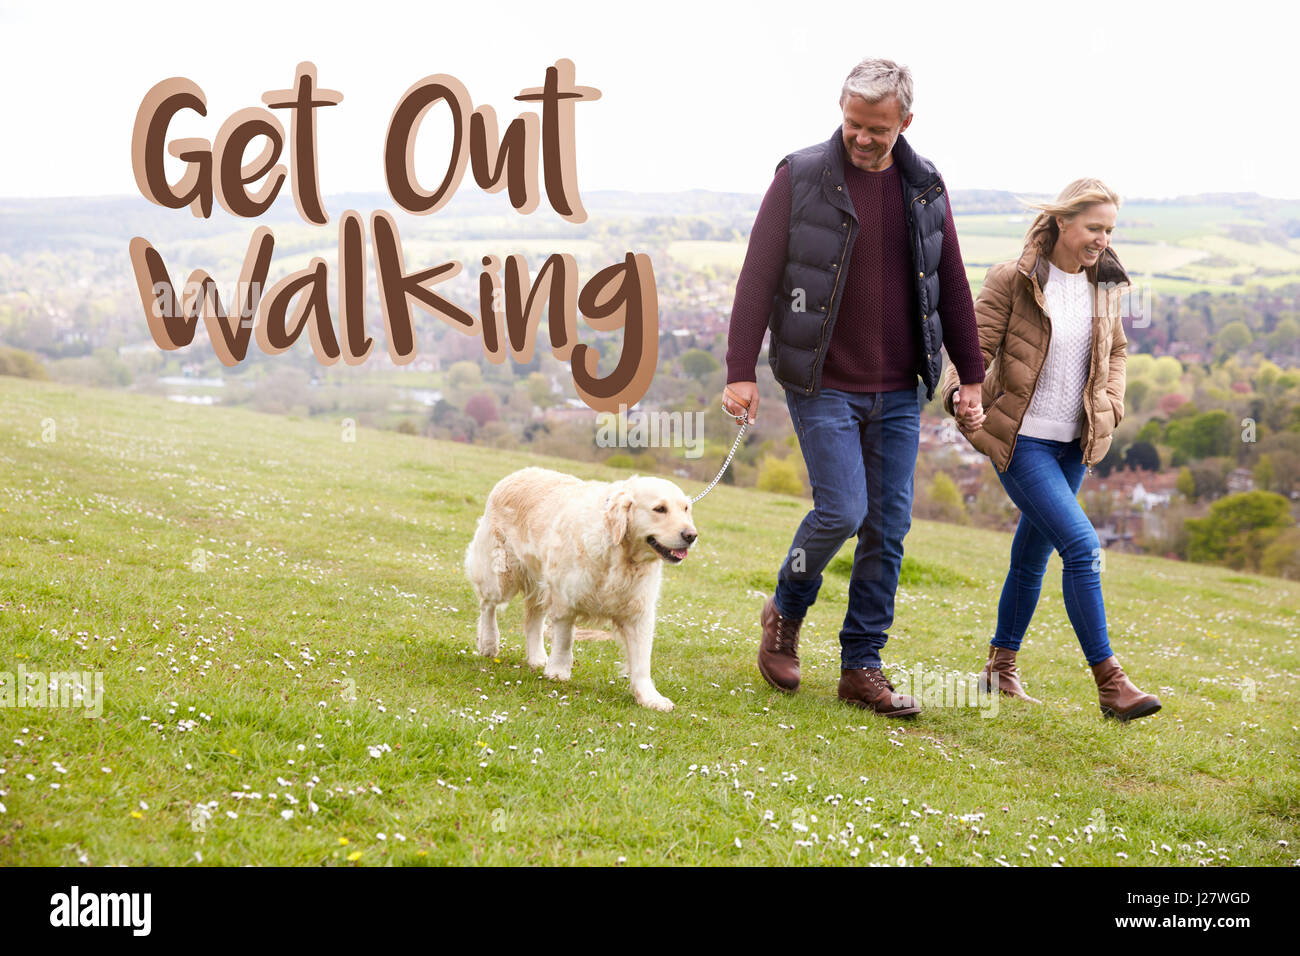 Get Out Walking Couple Taking Dog For Walk Stock Photo